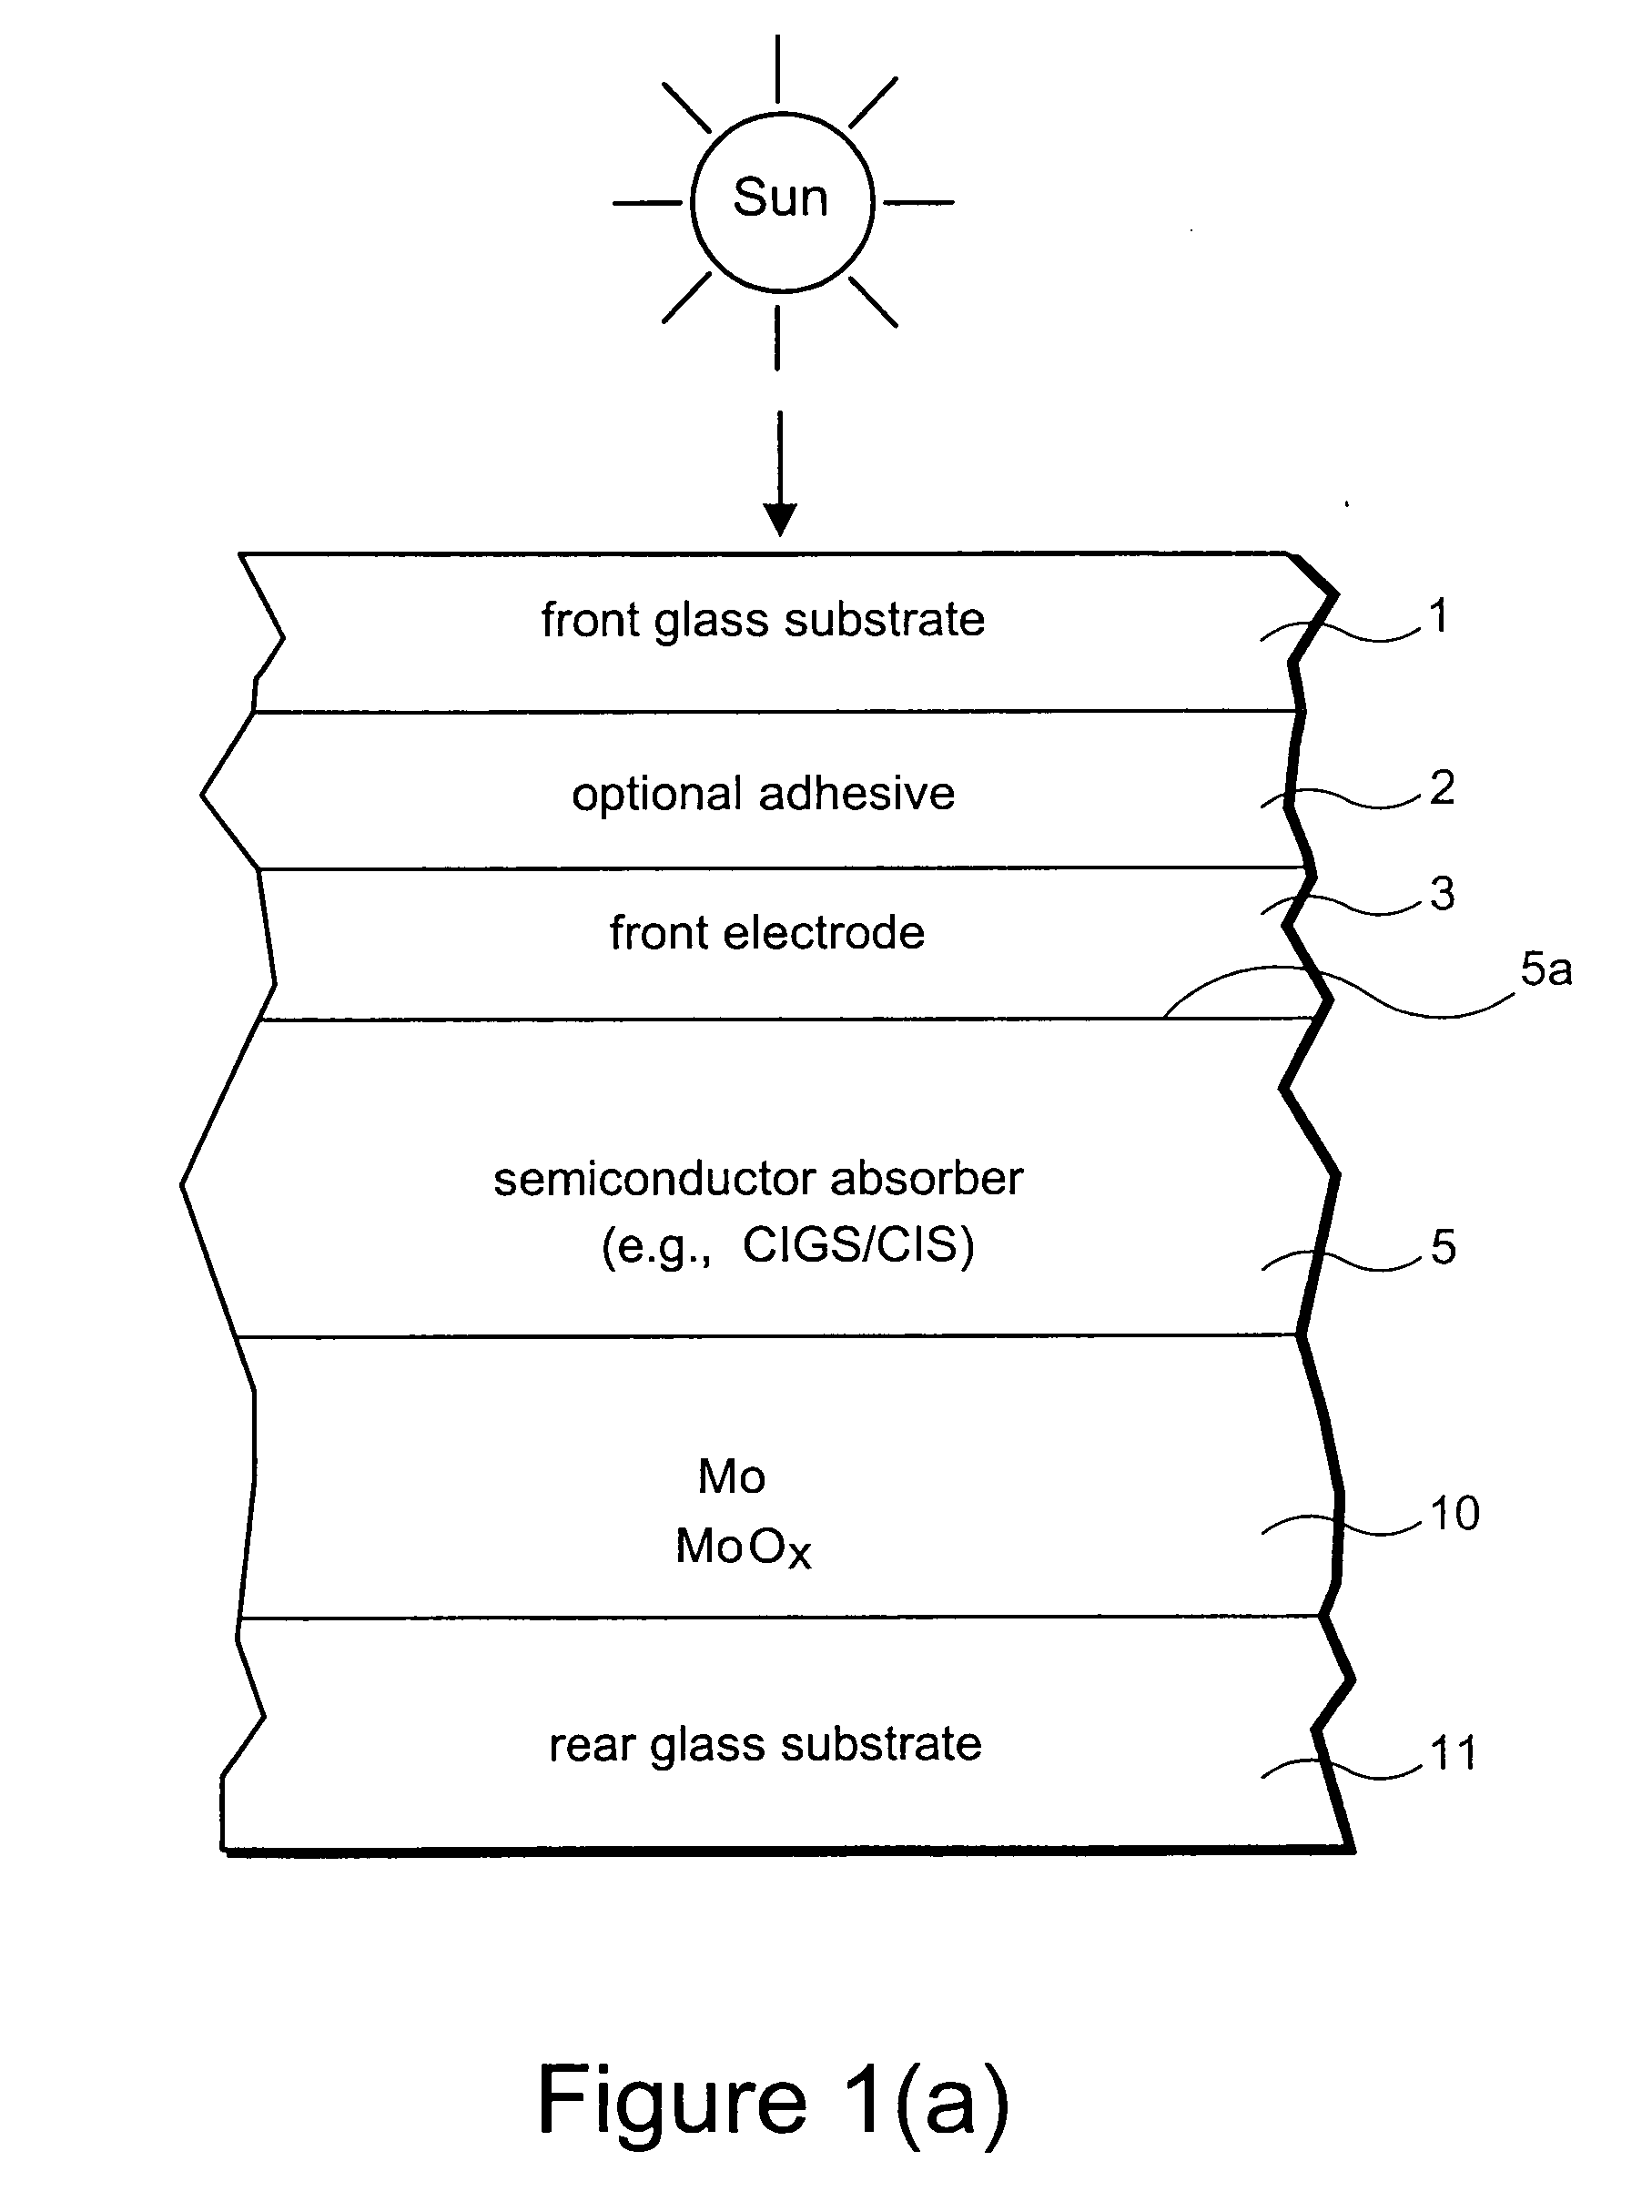 Rear electrode structure for use in photovoltaic device such as CIGS/CIS photovoltaic device and method of making same